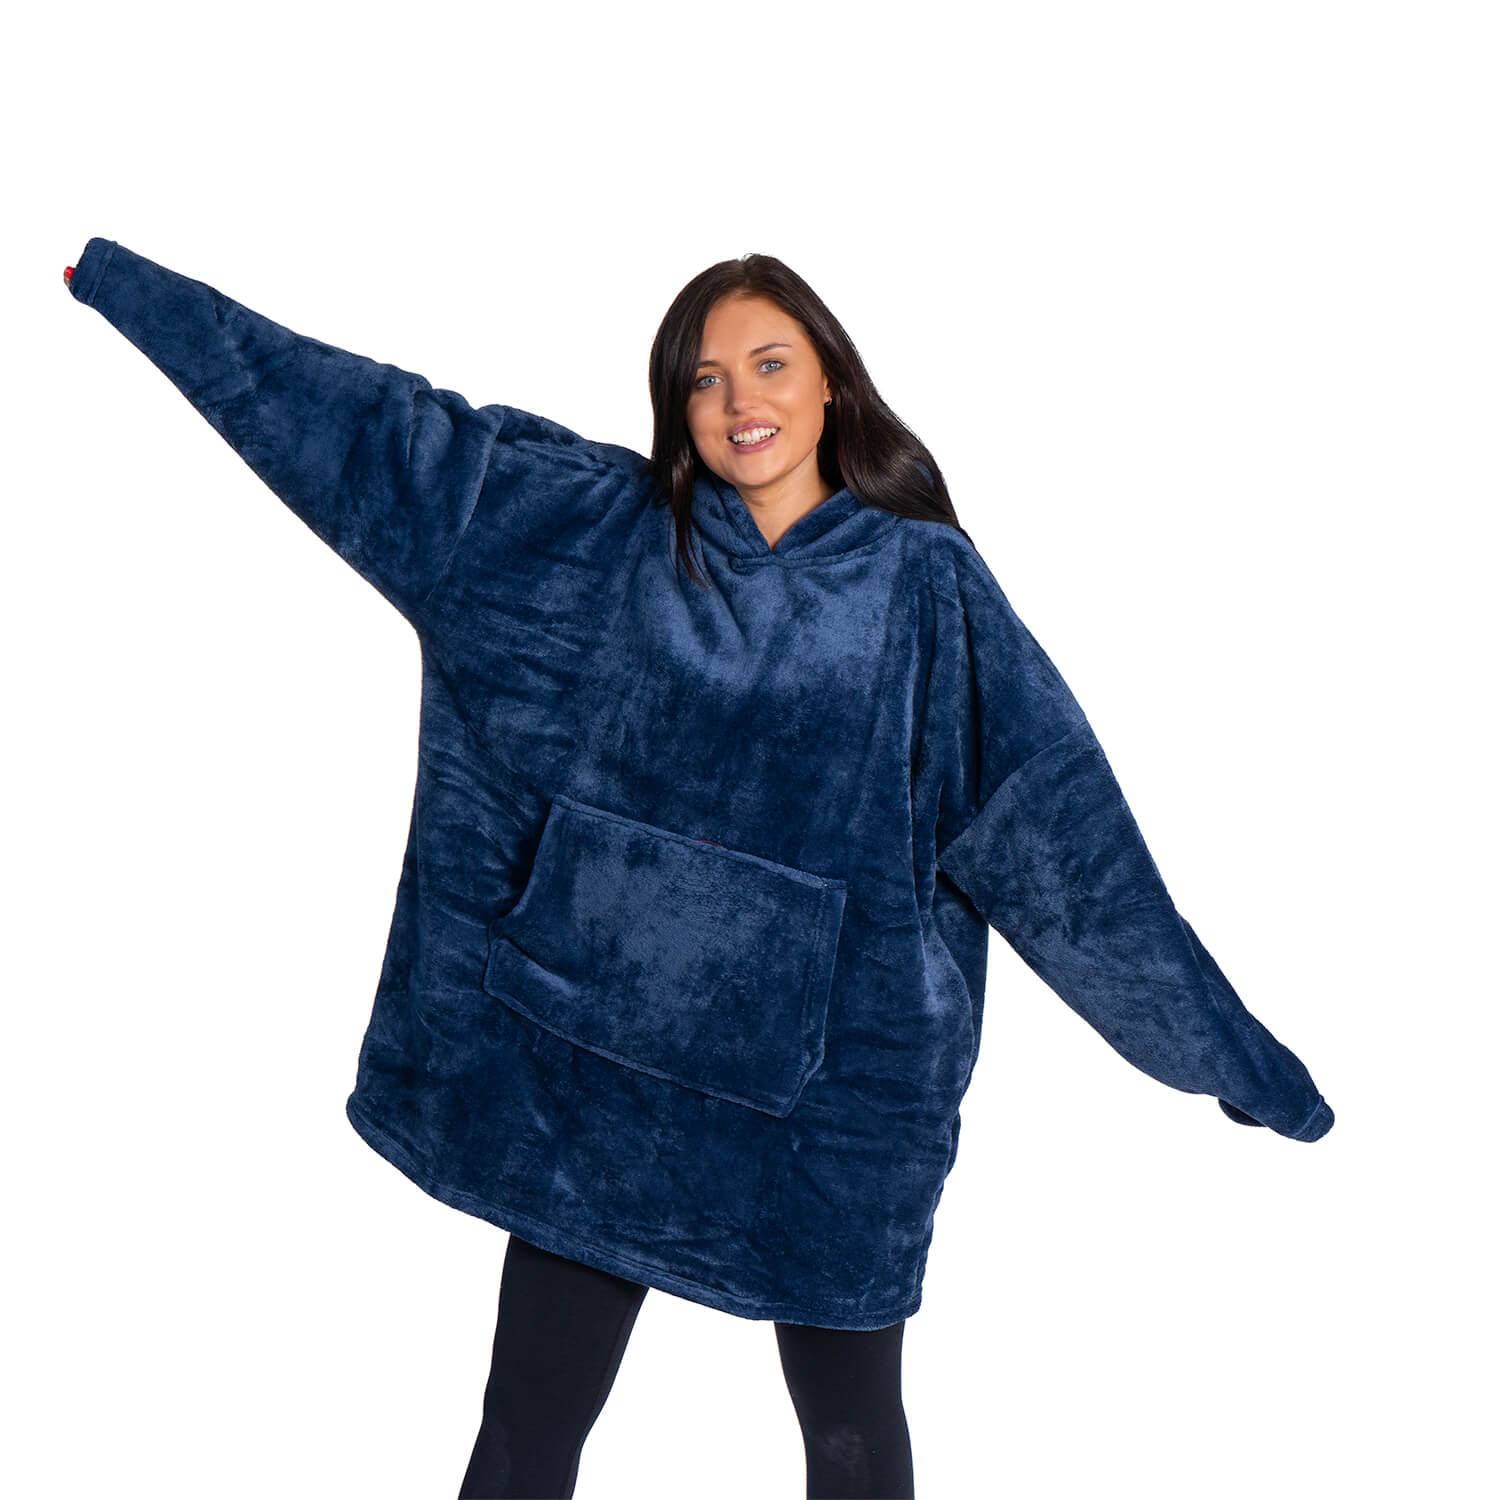 The Home Bedroom Cosy Robe - Navy 1 Shaws Department Stores